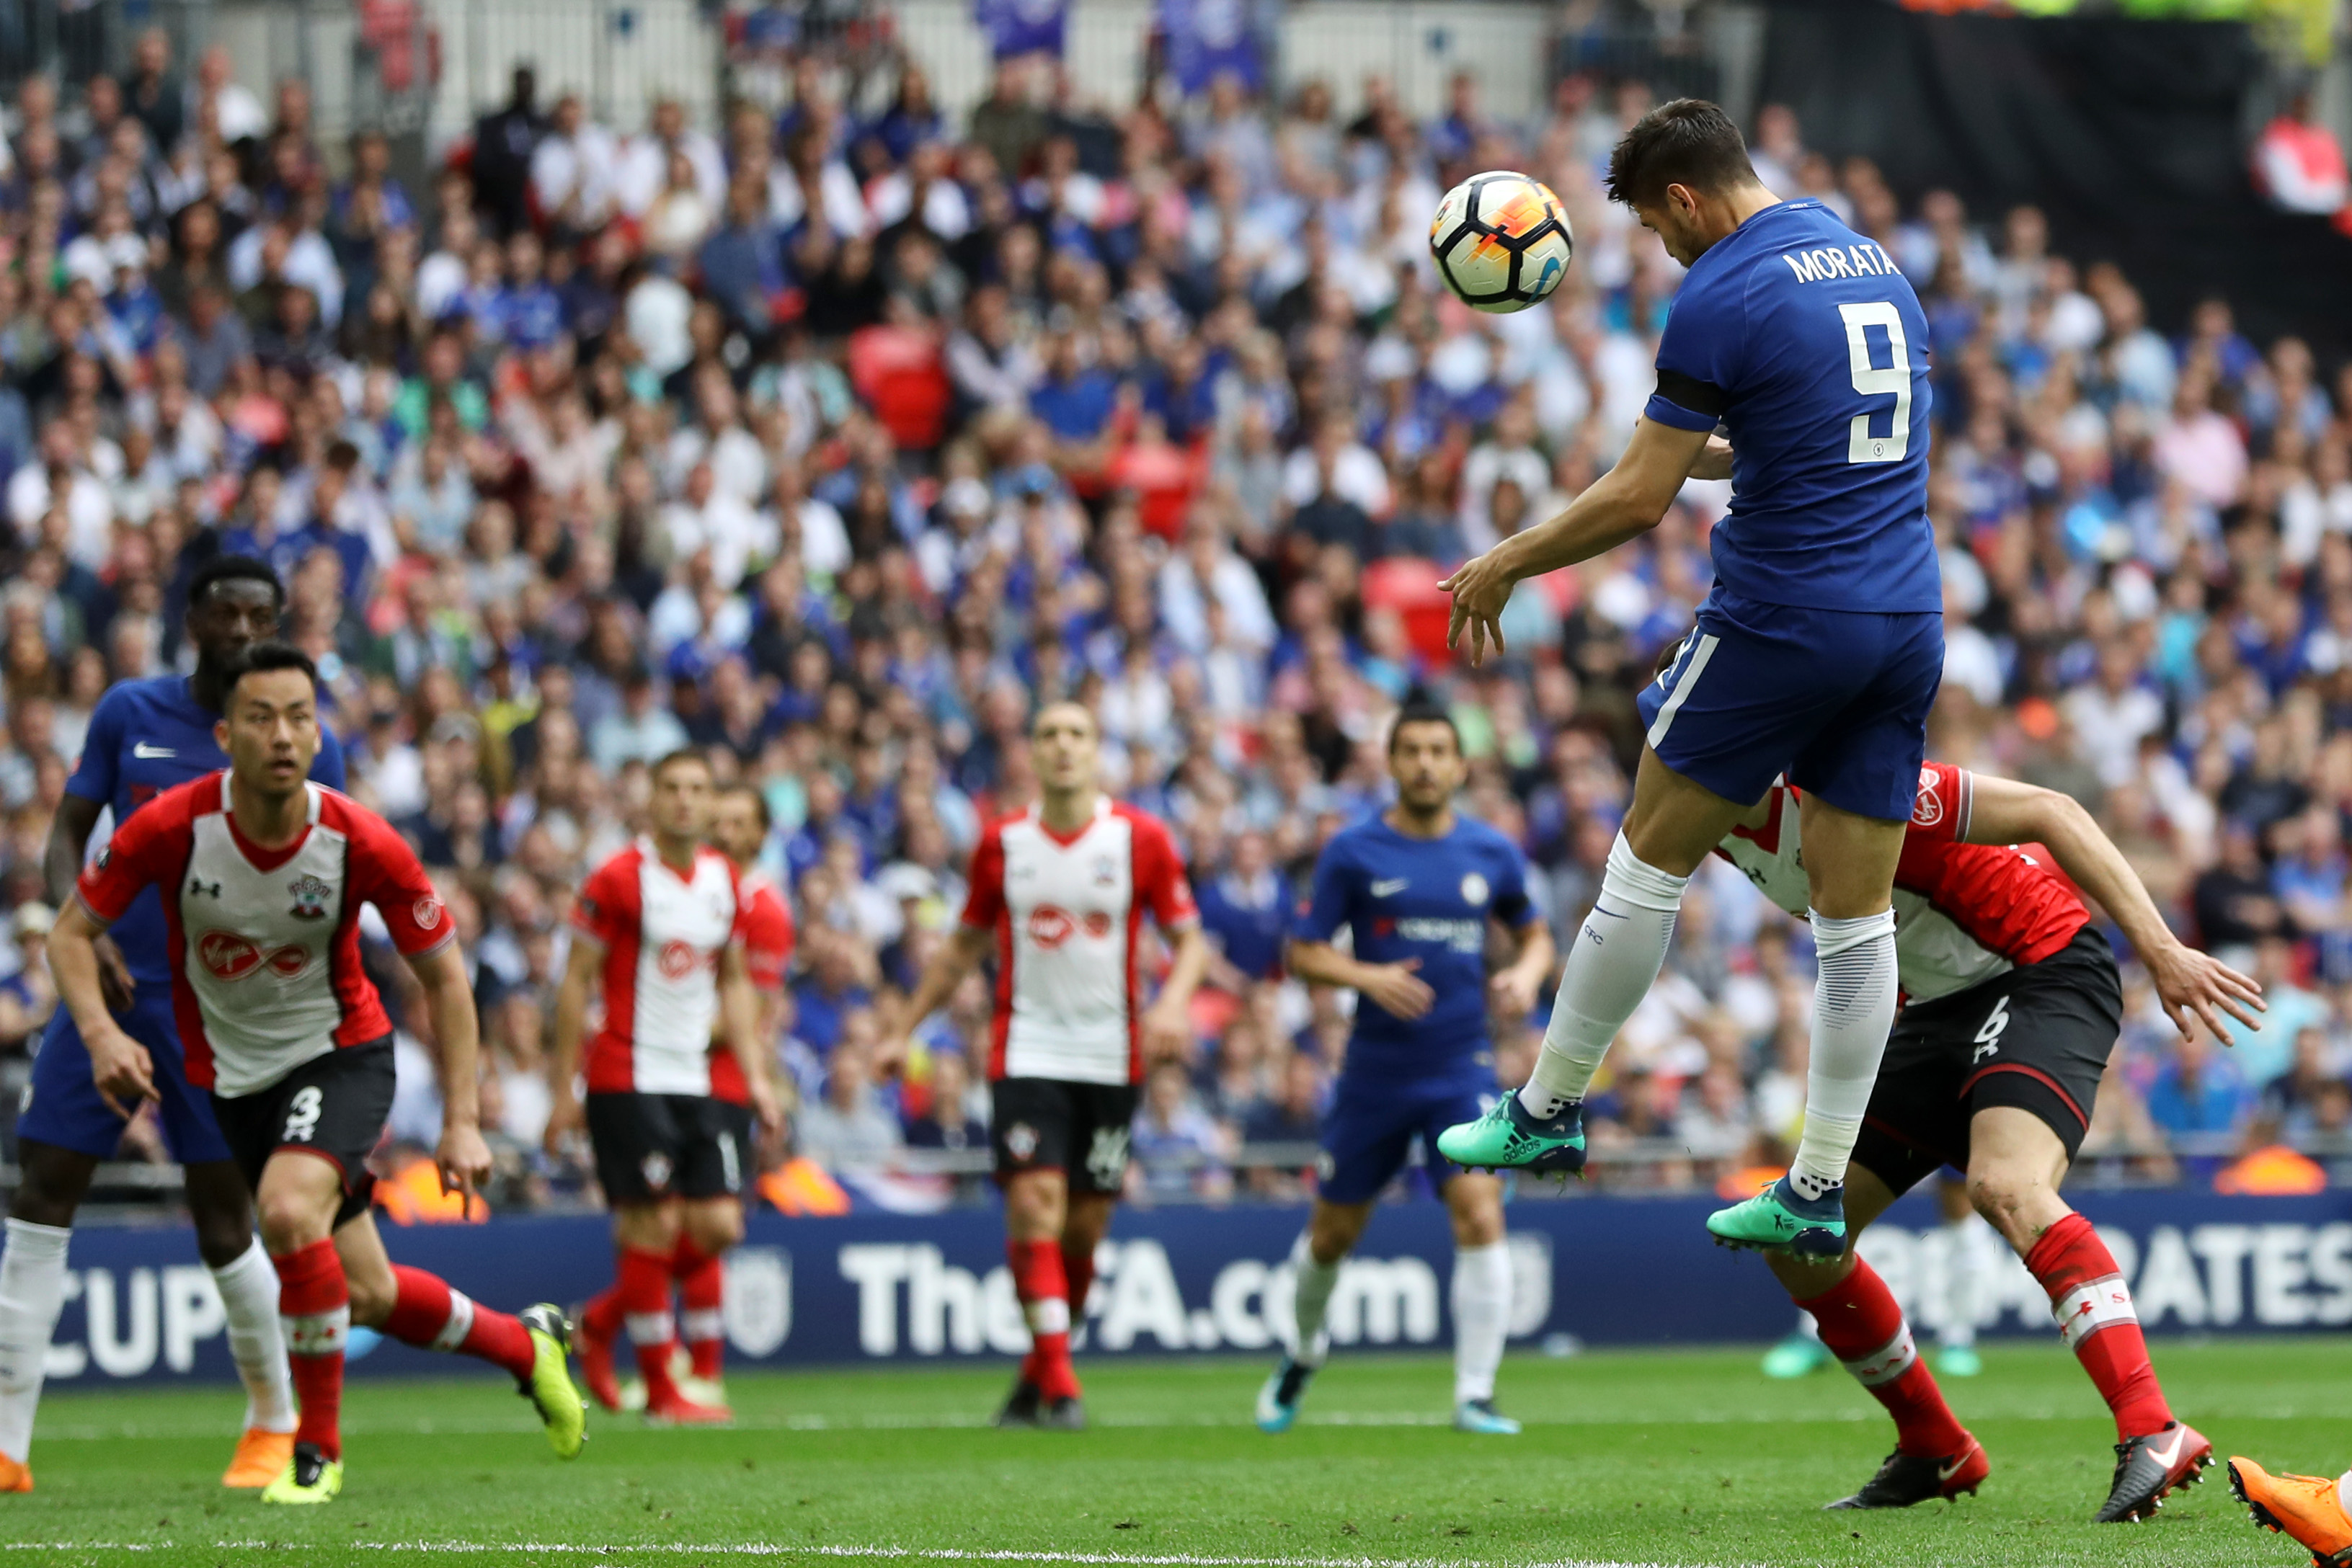 LONDON, ENGLAND - APRIL 22:  Alvaro Morata of Chelsea scores the 2nd Chelsea goal during the The Emirates FA Cup Semi Final match between Chelsea and Southampton at Wembley Stadium on April 22, 2018 in London, England.  (Photo by Dan Istitene/Getty Images)